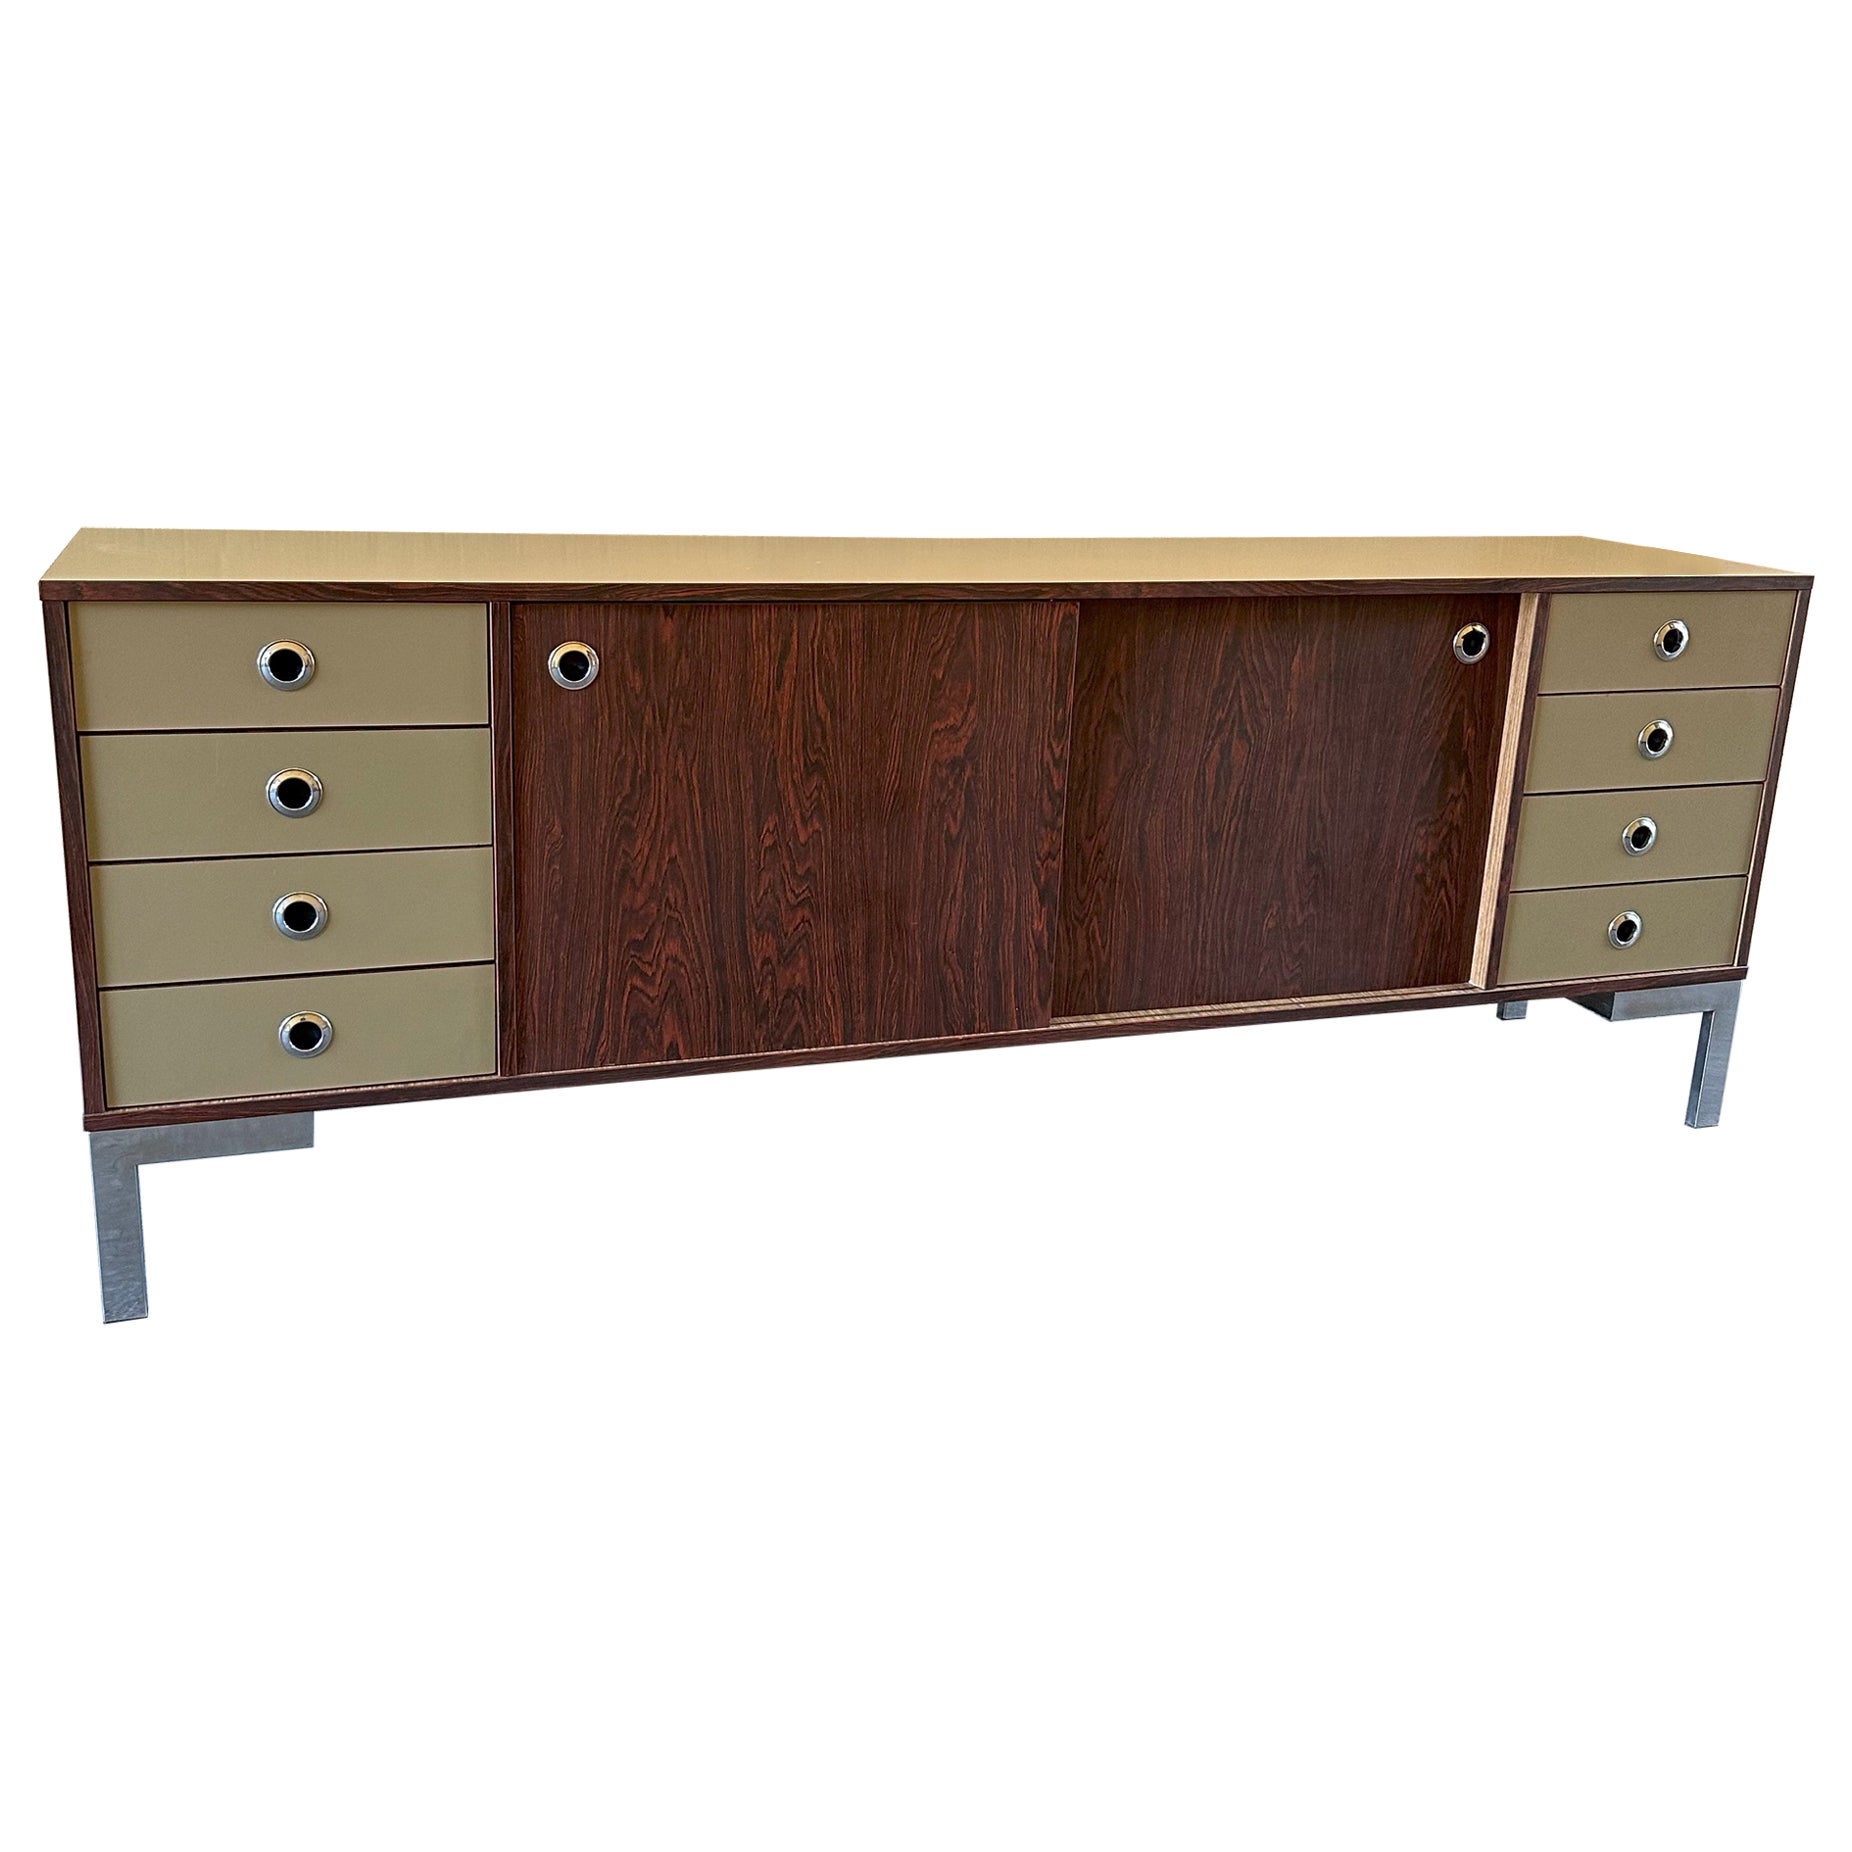 Midcentury-Modern Sideboard in Laminate '70 , Italian Manufacture  For Sale